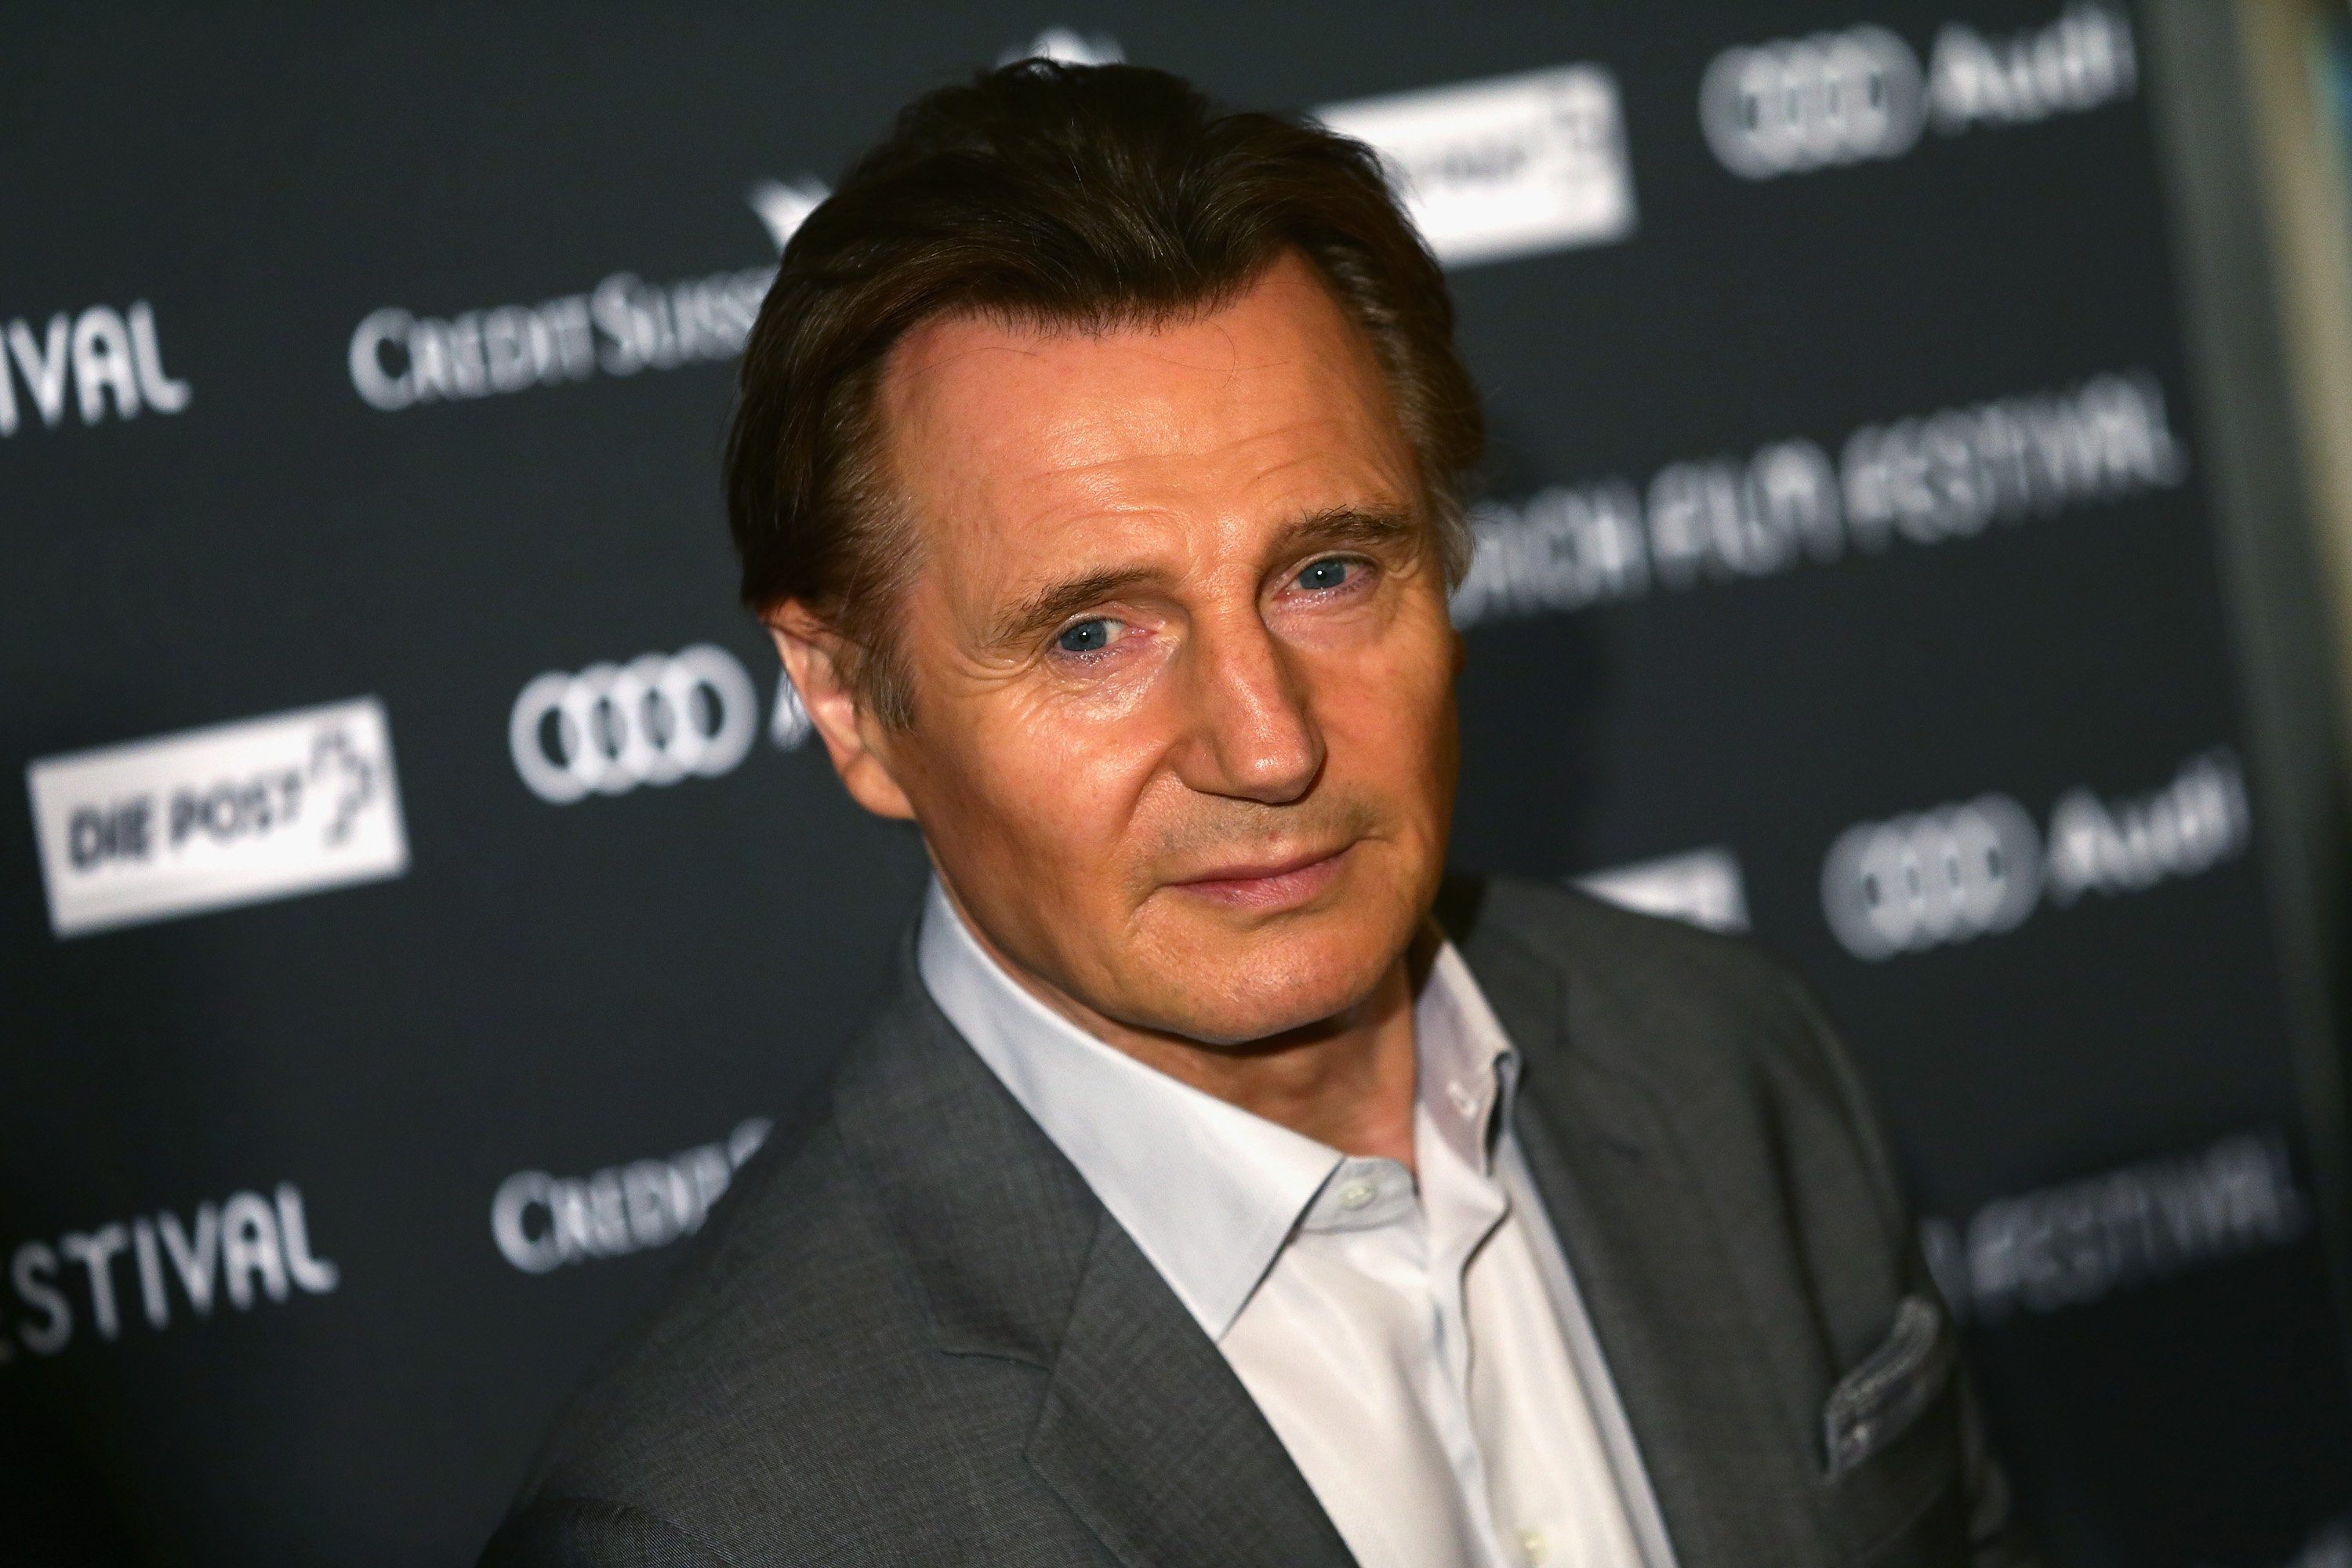 Liam Neeson in Switzerland in 2014 | Source: Getty Images